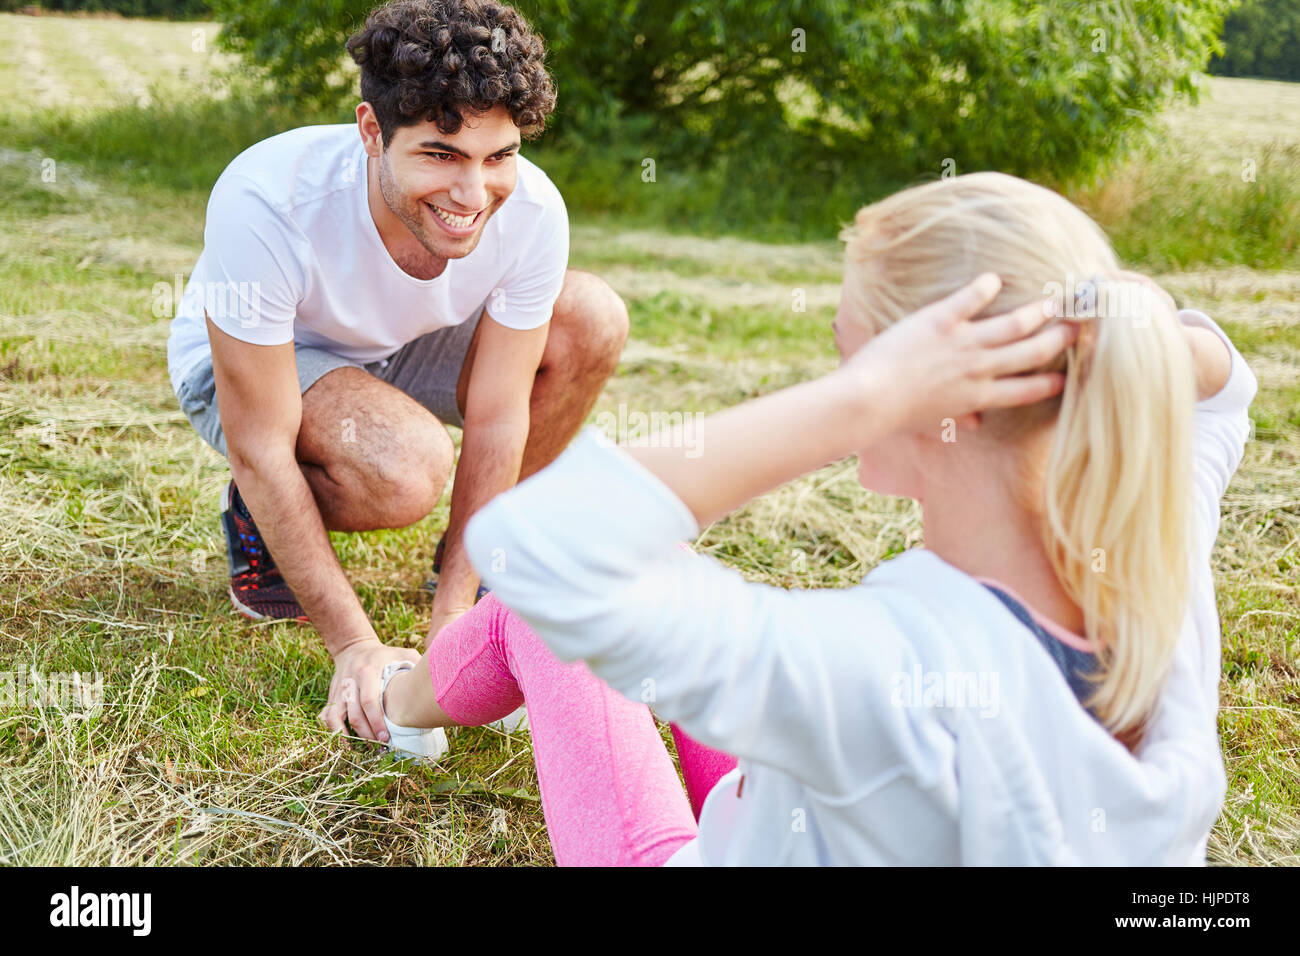 Young man helps woman with training sit-up exercise Stock Photo